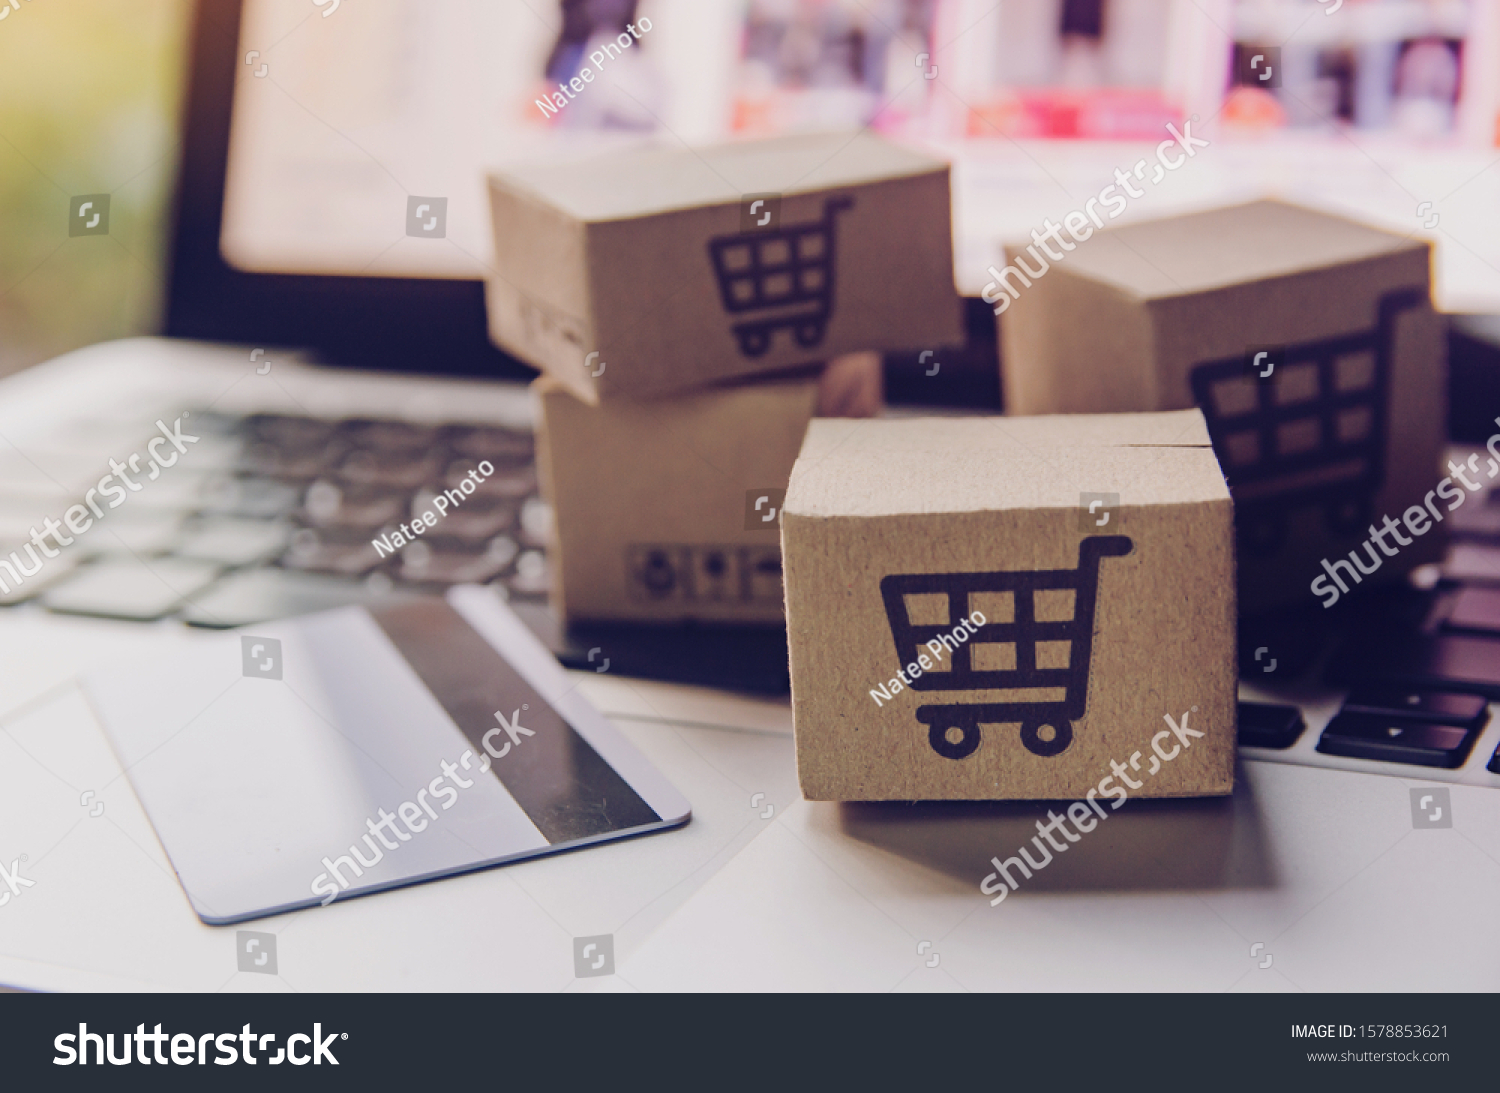 Online shopping - Paper cartons or parcel with a shopping cart logo and credit card on a laptop keyboard. Shopping service on The online web and offers home delivery.
 #1578853621